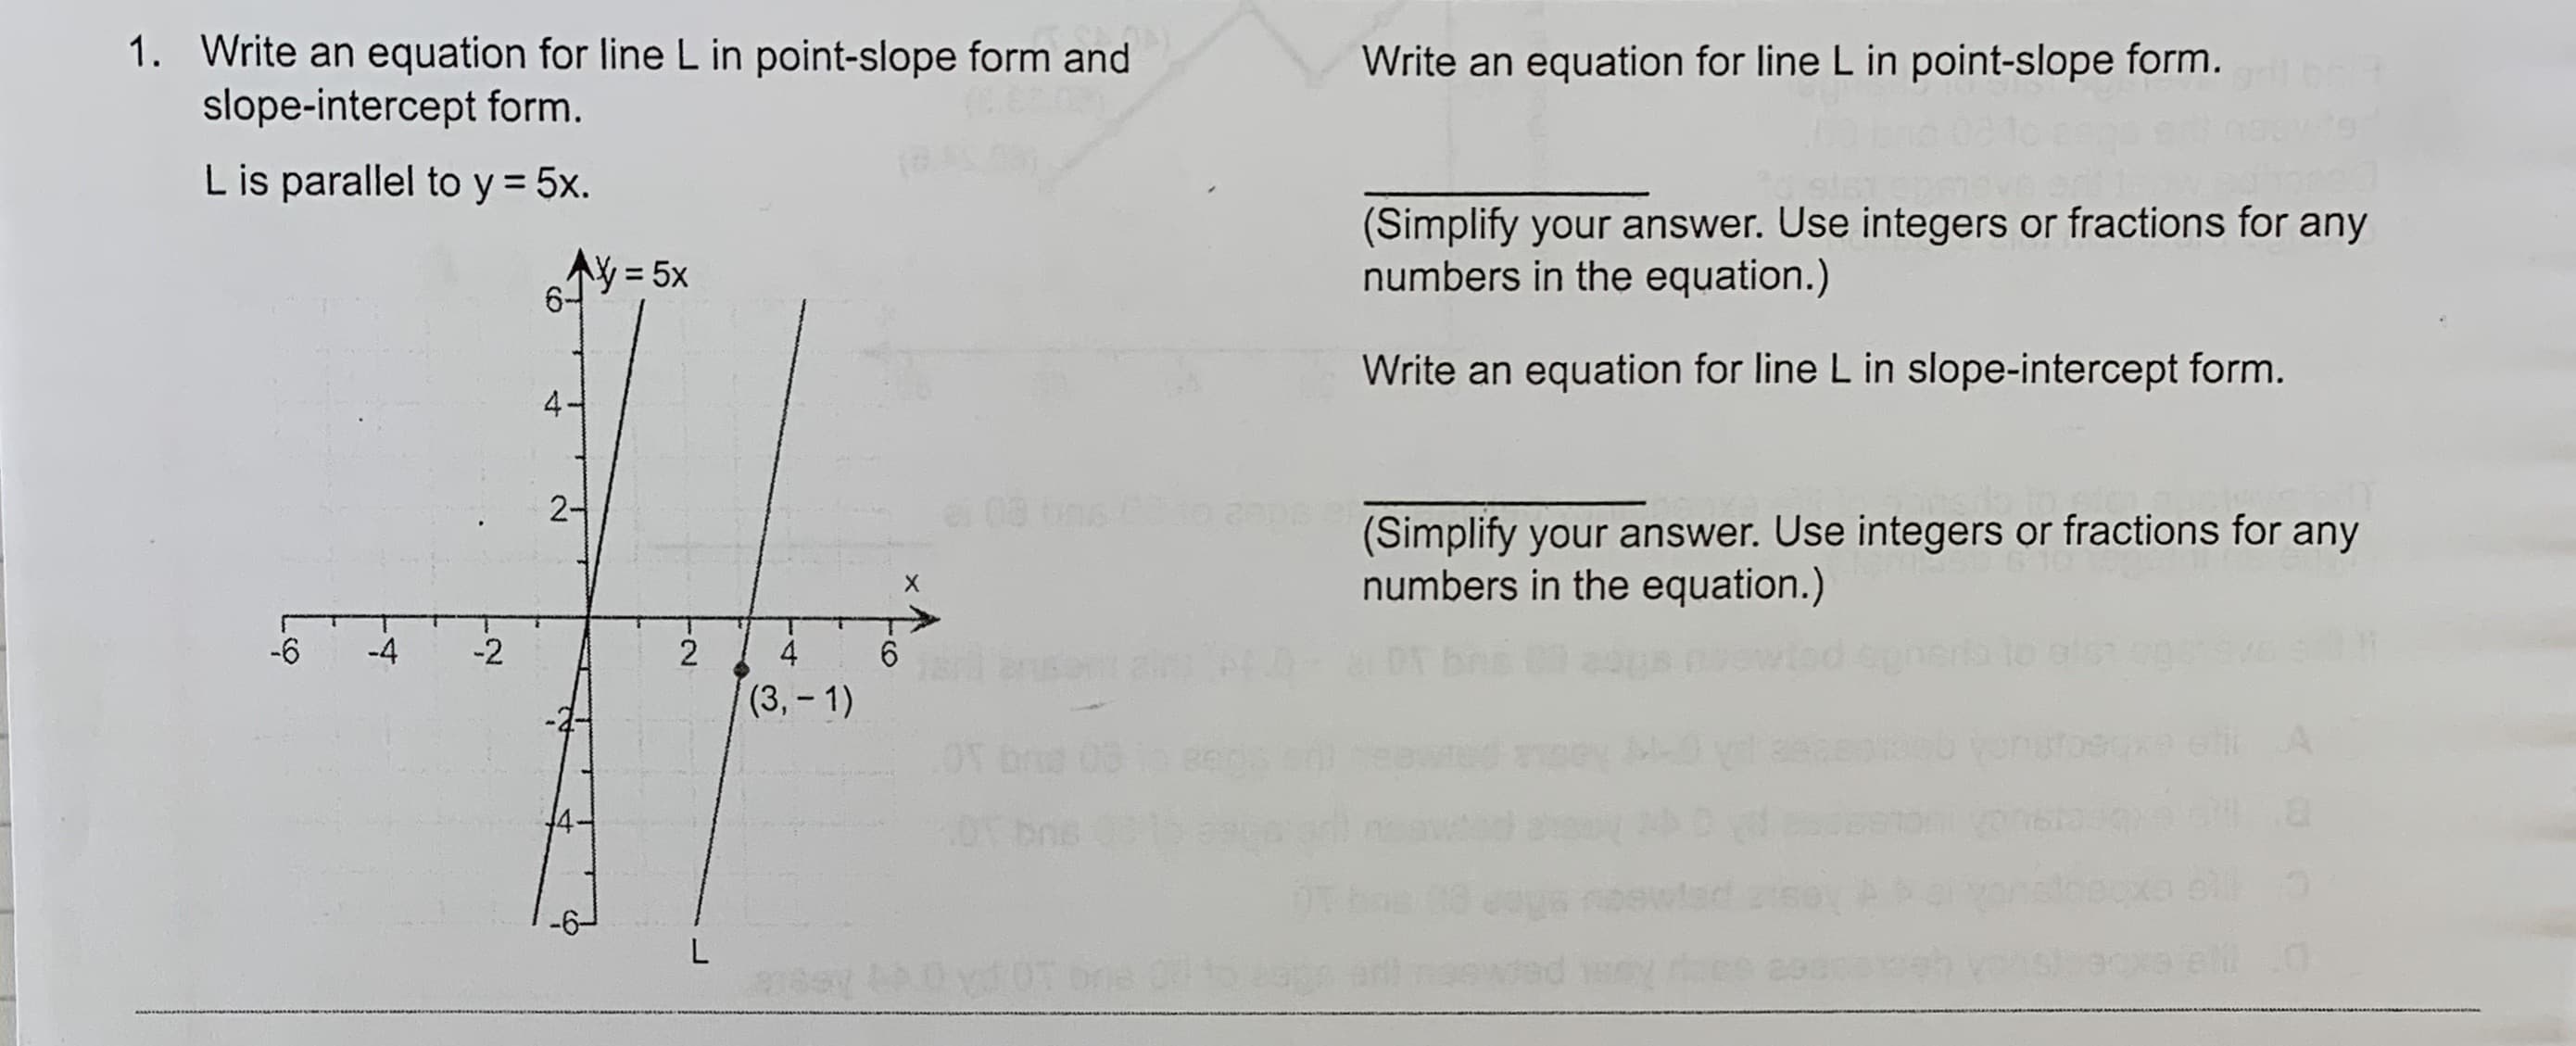 1. Write an equation for line L in point-slope form and
slope-intercept form.
Write an equation for line L in point-slope form.
L is parallel to y 5x.
(Simplify your answer. Use integers or fractions for any
numbers in the equation.)
AY=5x
Write an equation for line L in slope-intercept form.
4
2
ei 08
o a0p
(Simplify your answer. Use integers or fractions for any
numbers in the equation.)
X
-4
-6
-2
2
4
et an br
(3,-1)
A
ngeyL
0T bos
86T
4
bos
